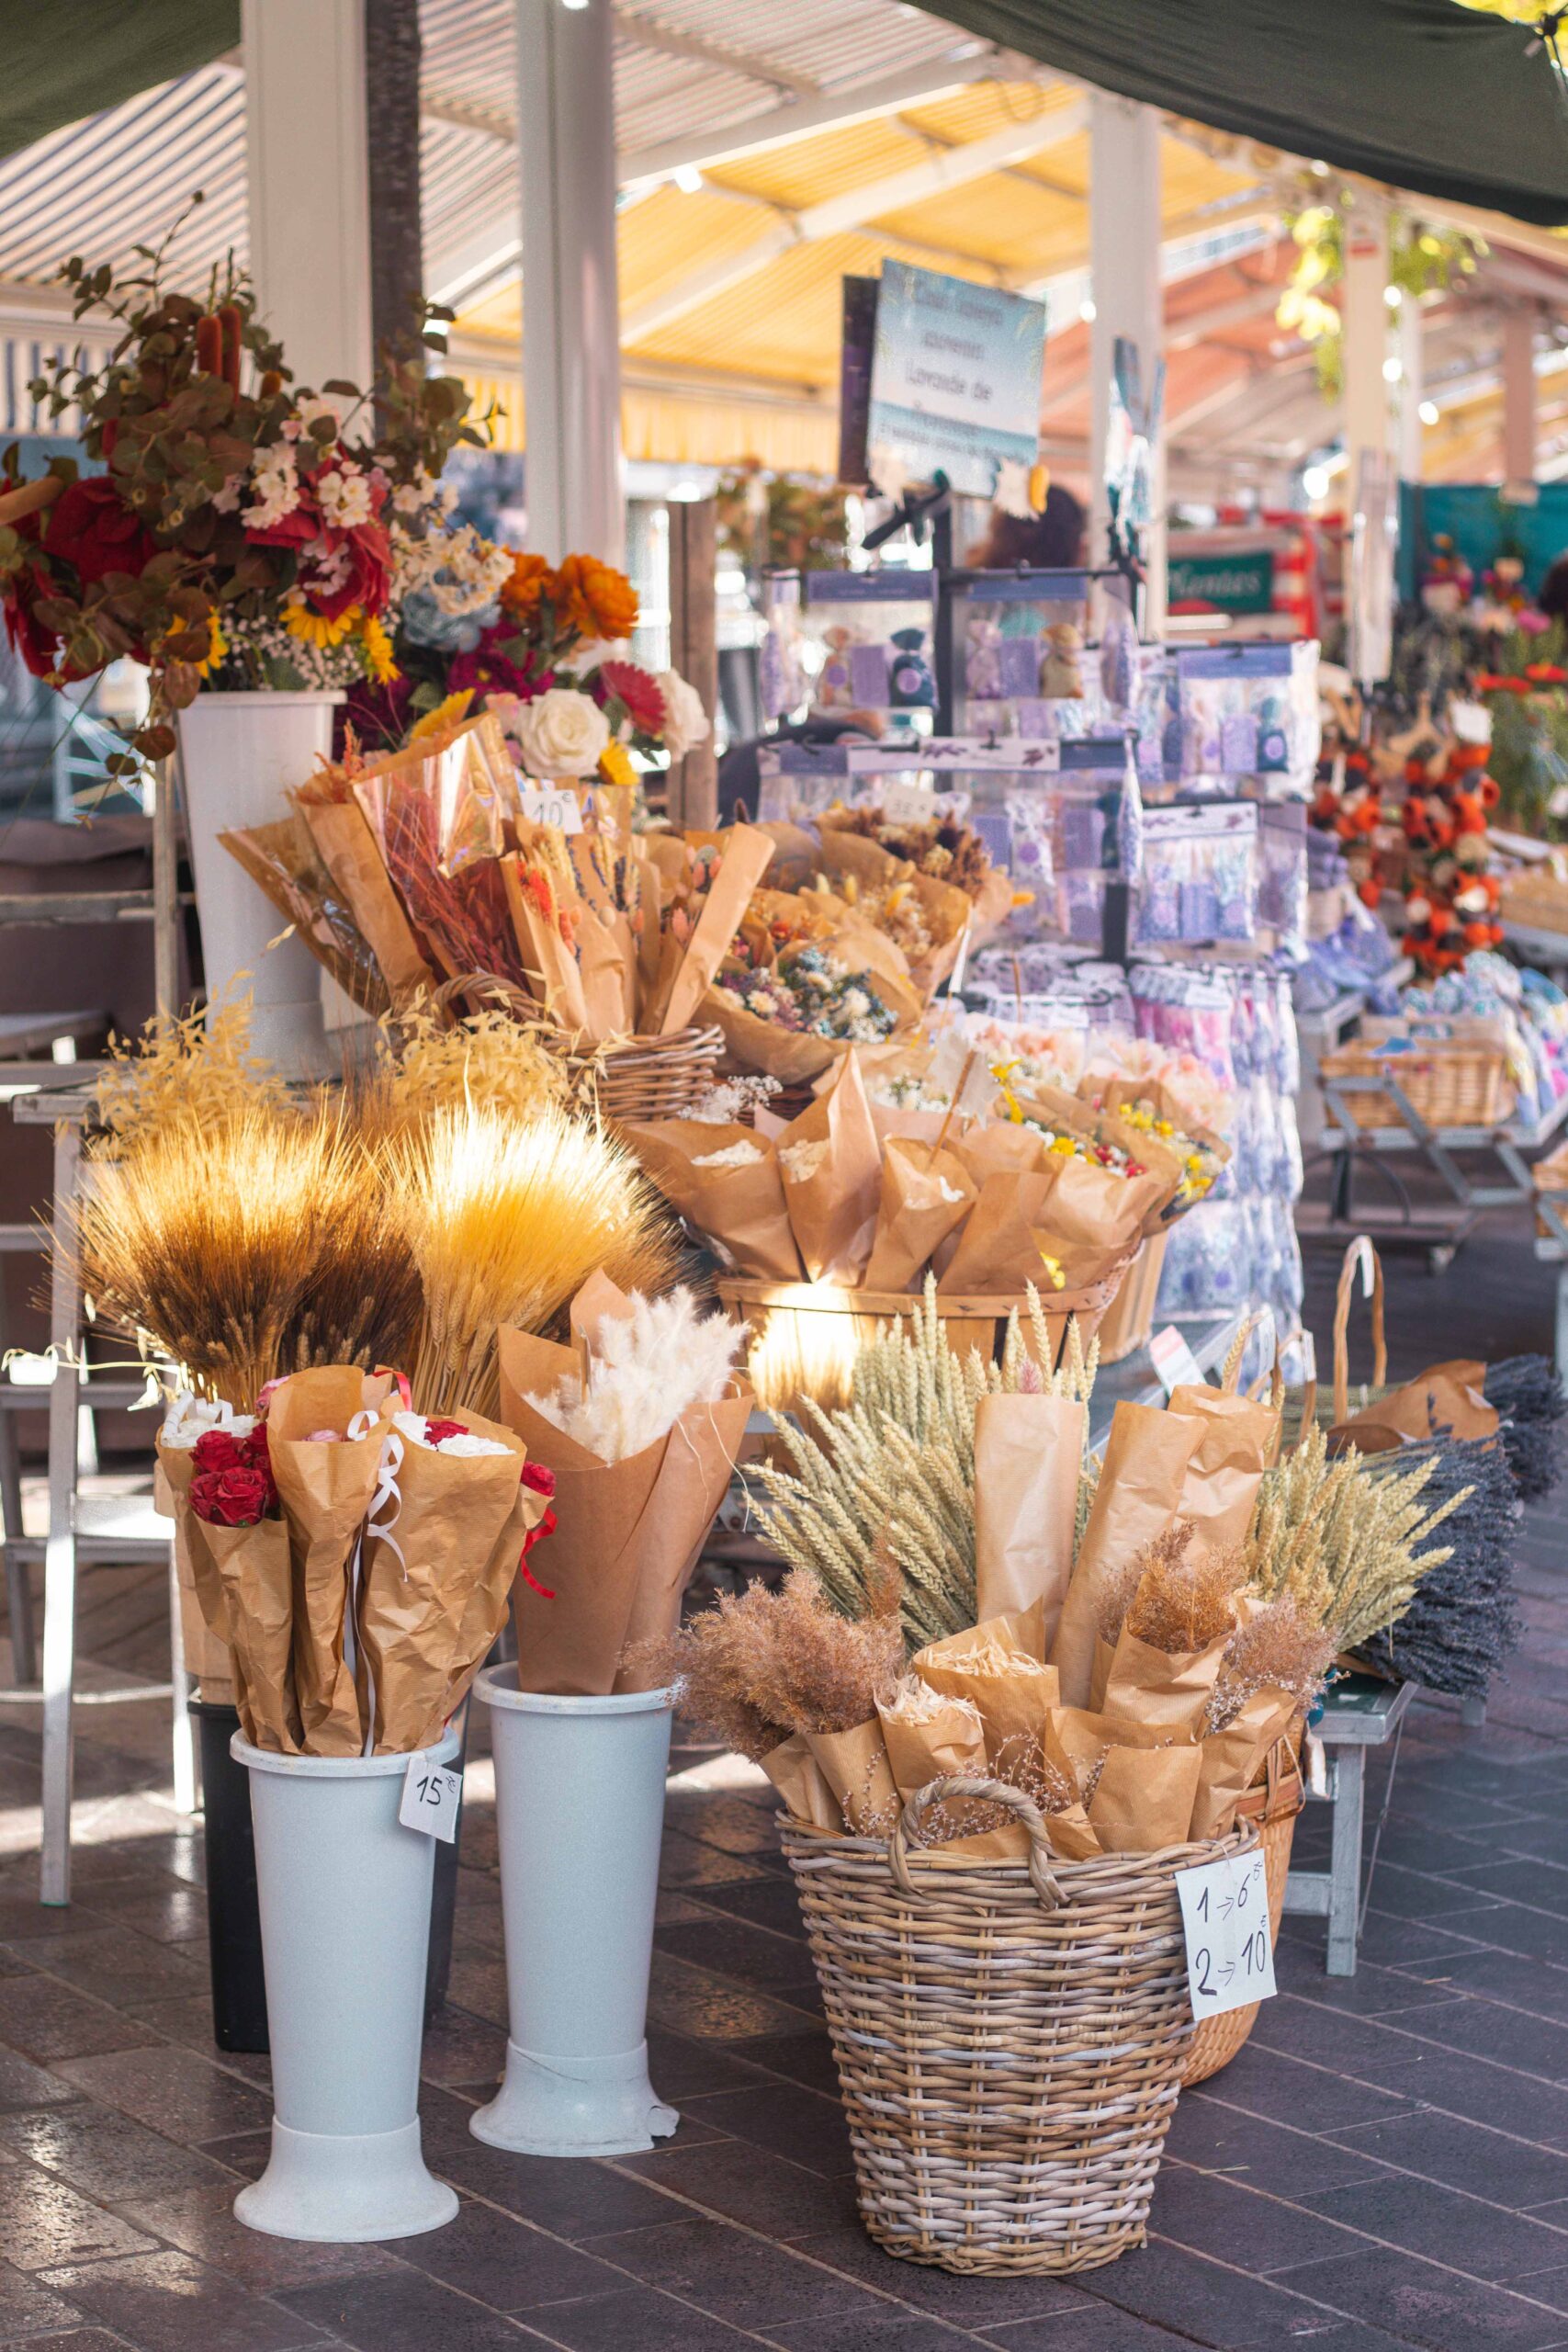 Details of a market stall selling flowers and dried bouquets at the Marché Aux Fleurs Cours Saleya in Nice, France